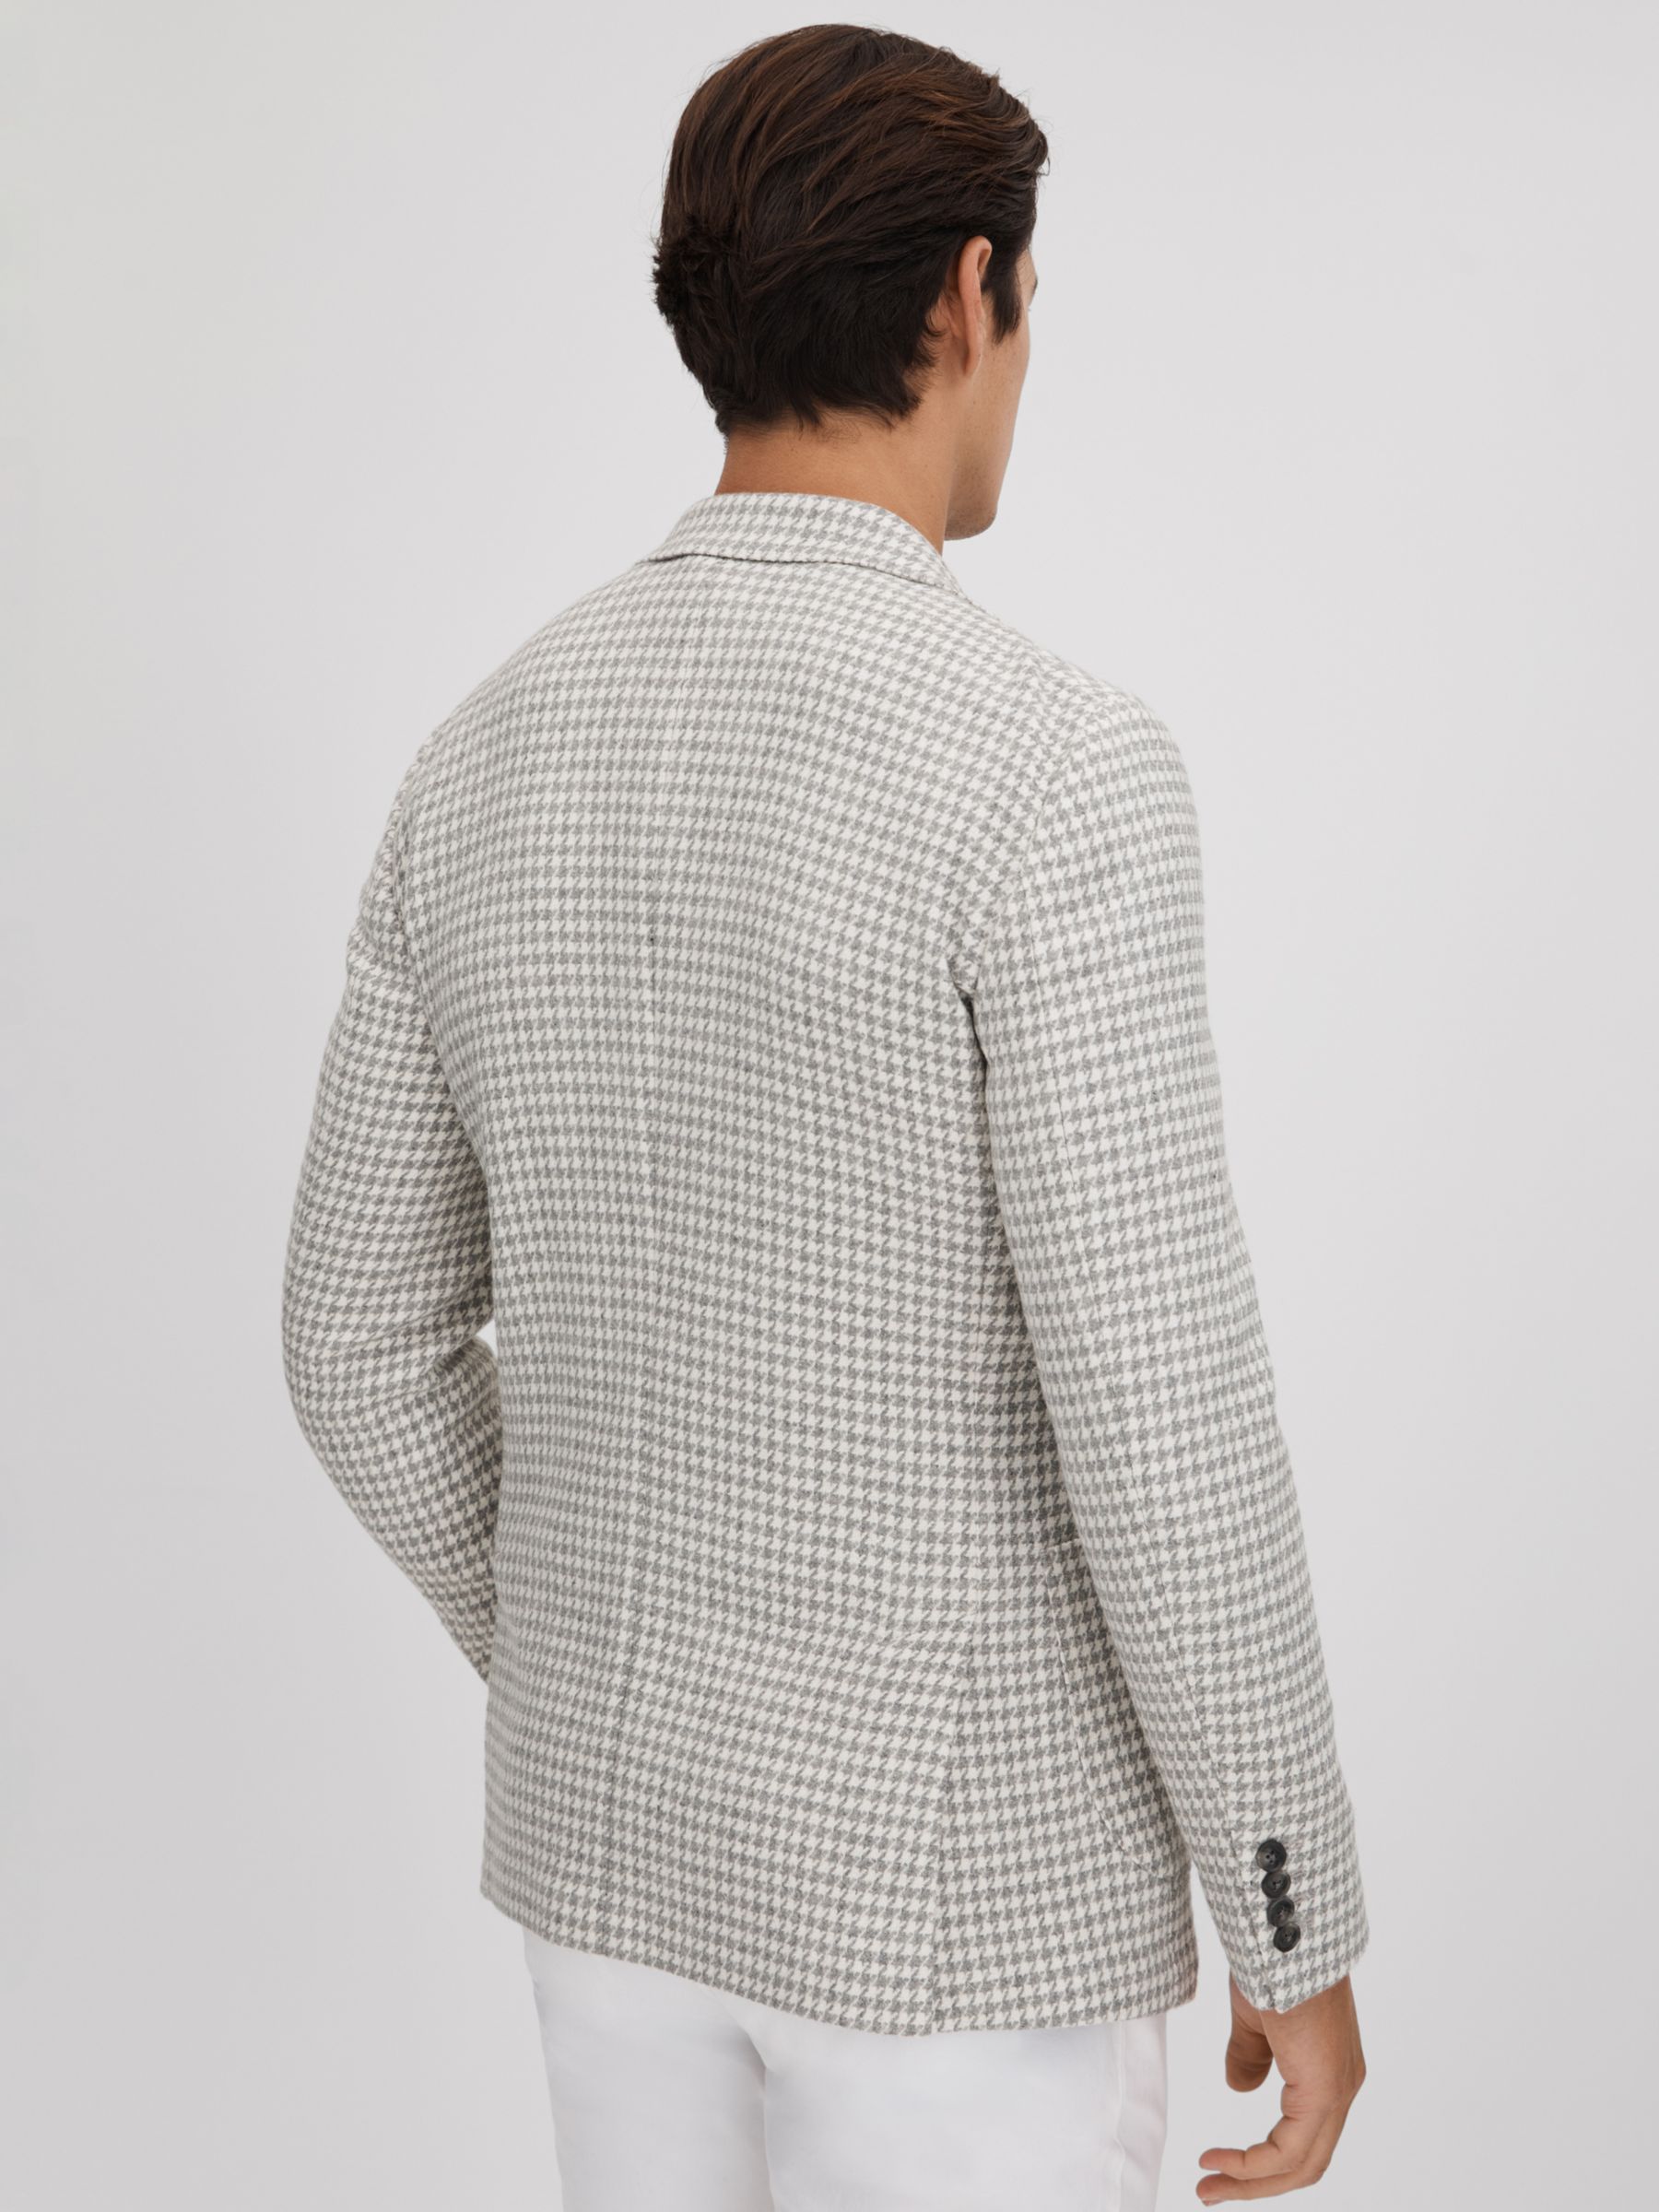 Buy Reiss Nite Tailored Fit Dogtooth Print Blazer, Grey Online at johnlewis.com